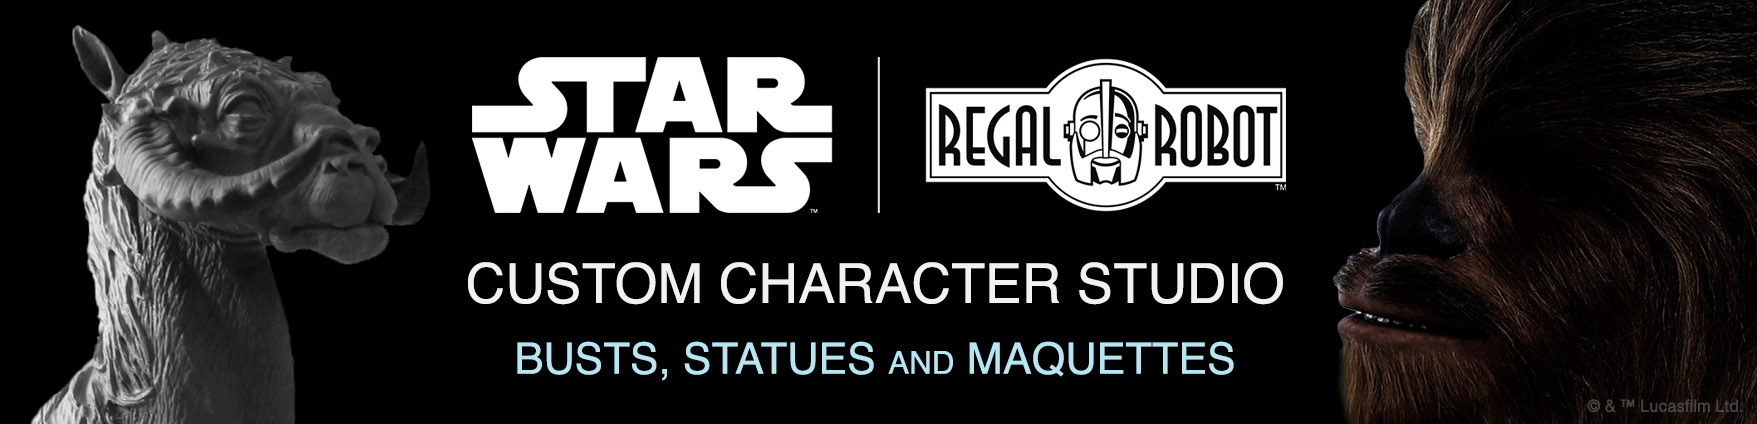 Star Wars life sized statues by Regal Robot